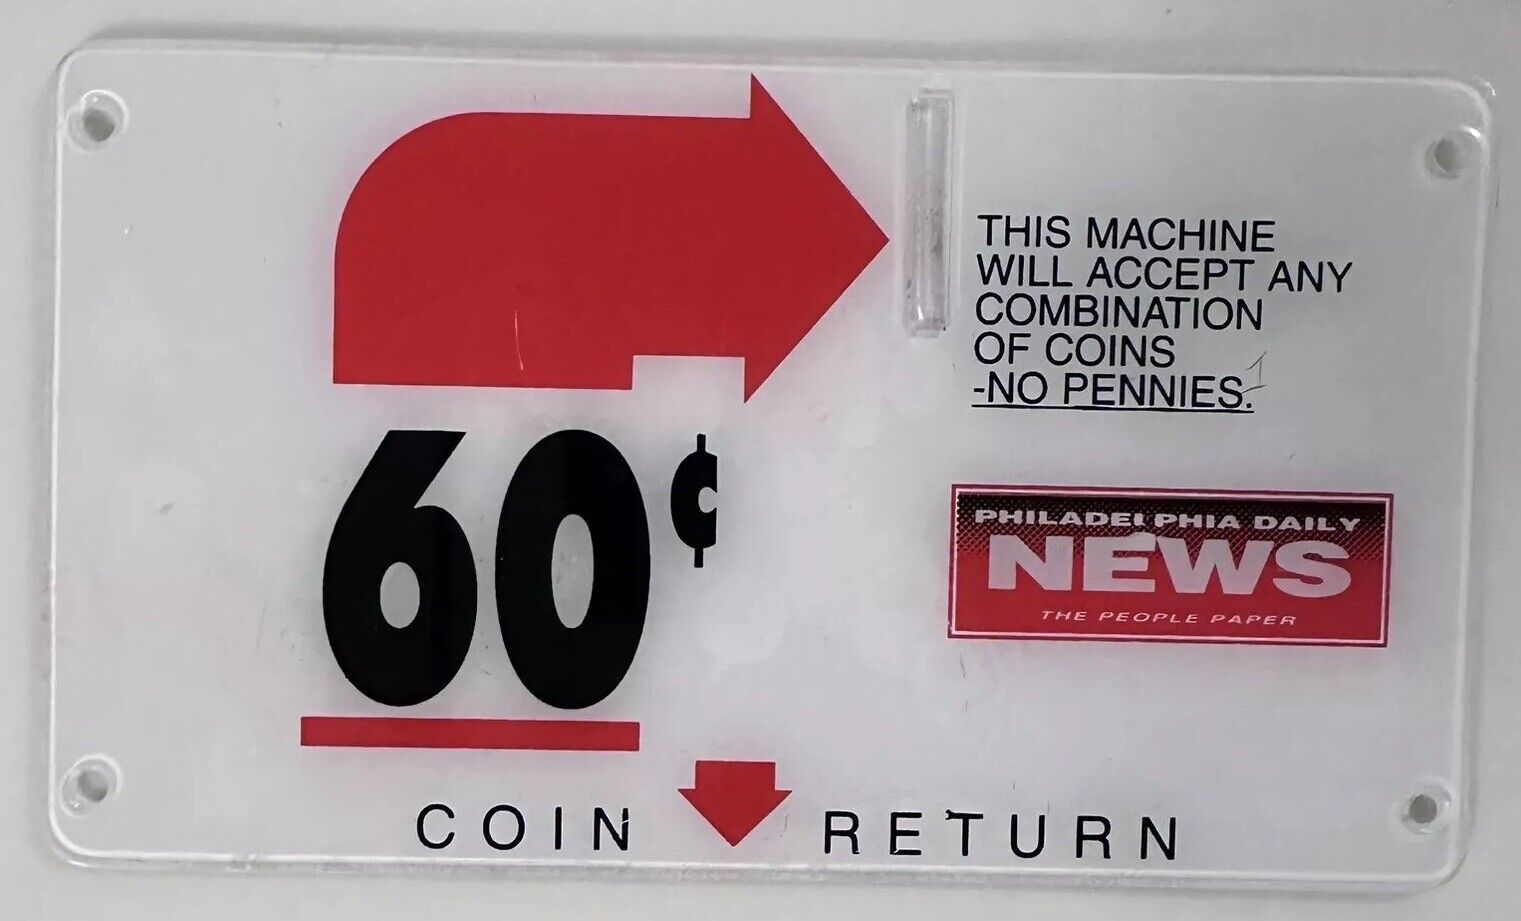 Philadelphia Daily News The People’s Paper Newspaper 60 Cents Coin Machine Sign